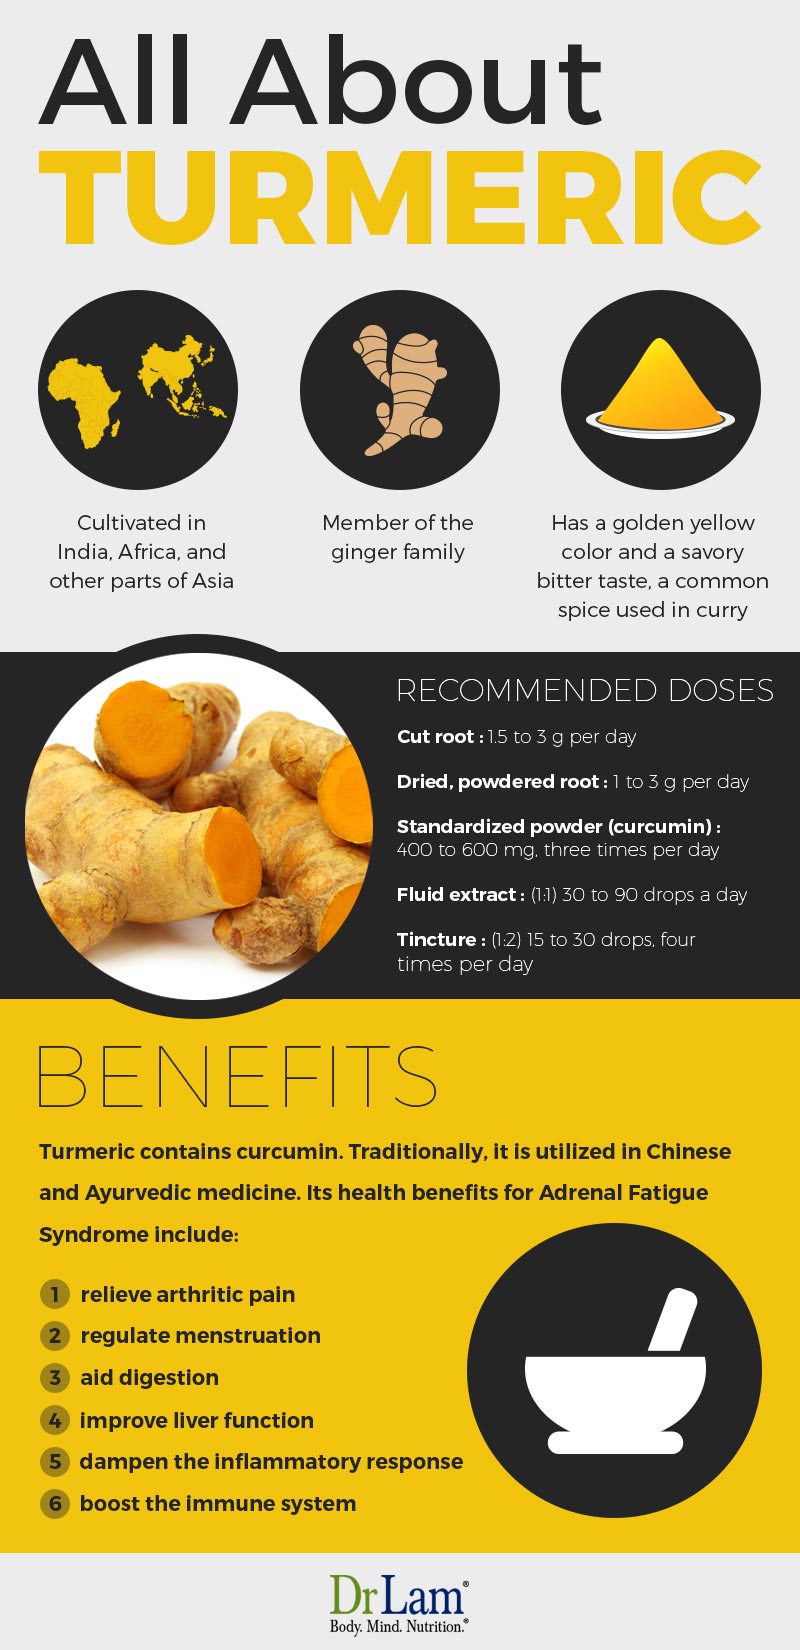 Check out this easy to understand infographic about turmeric